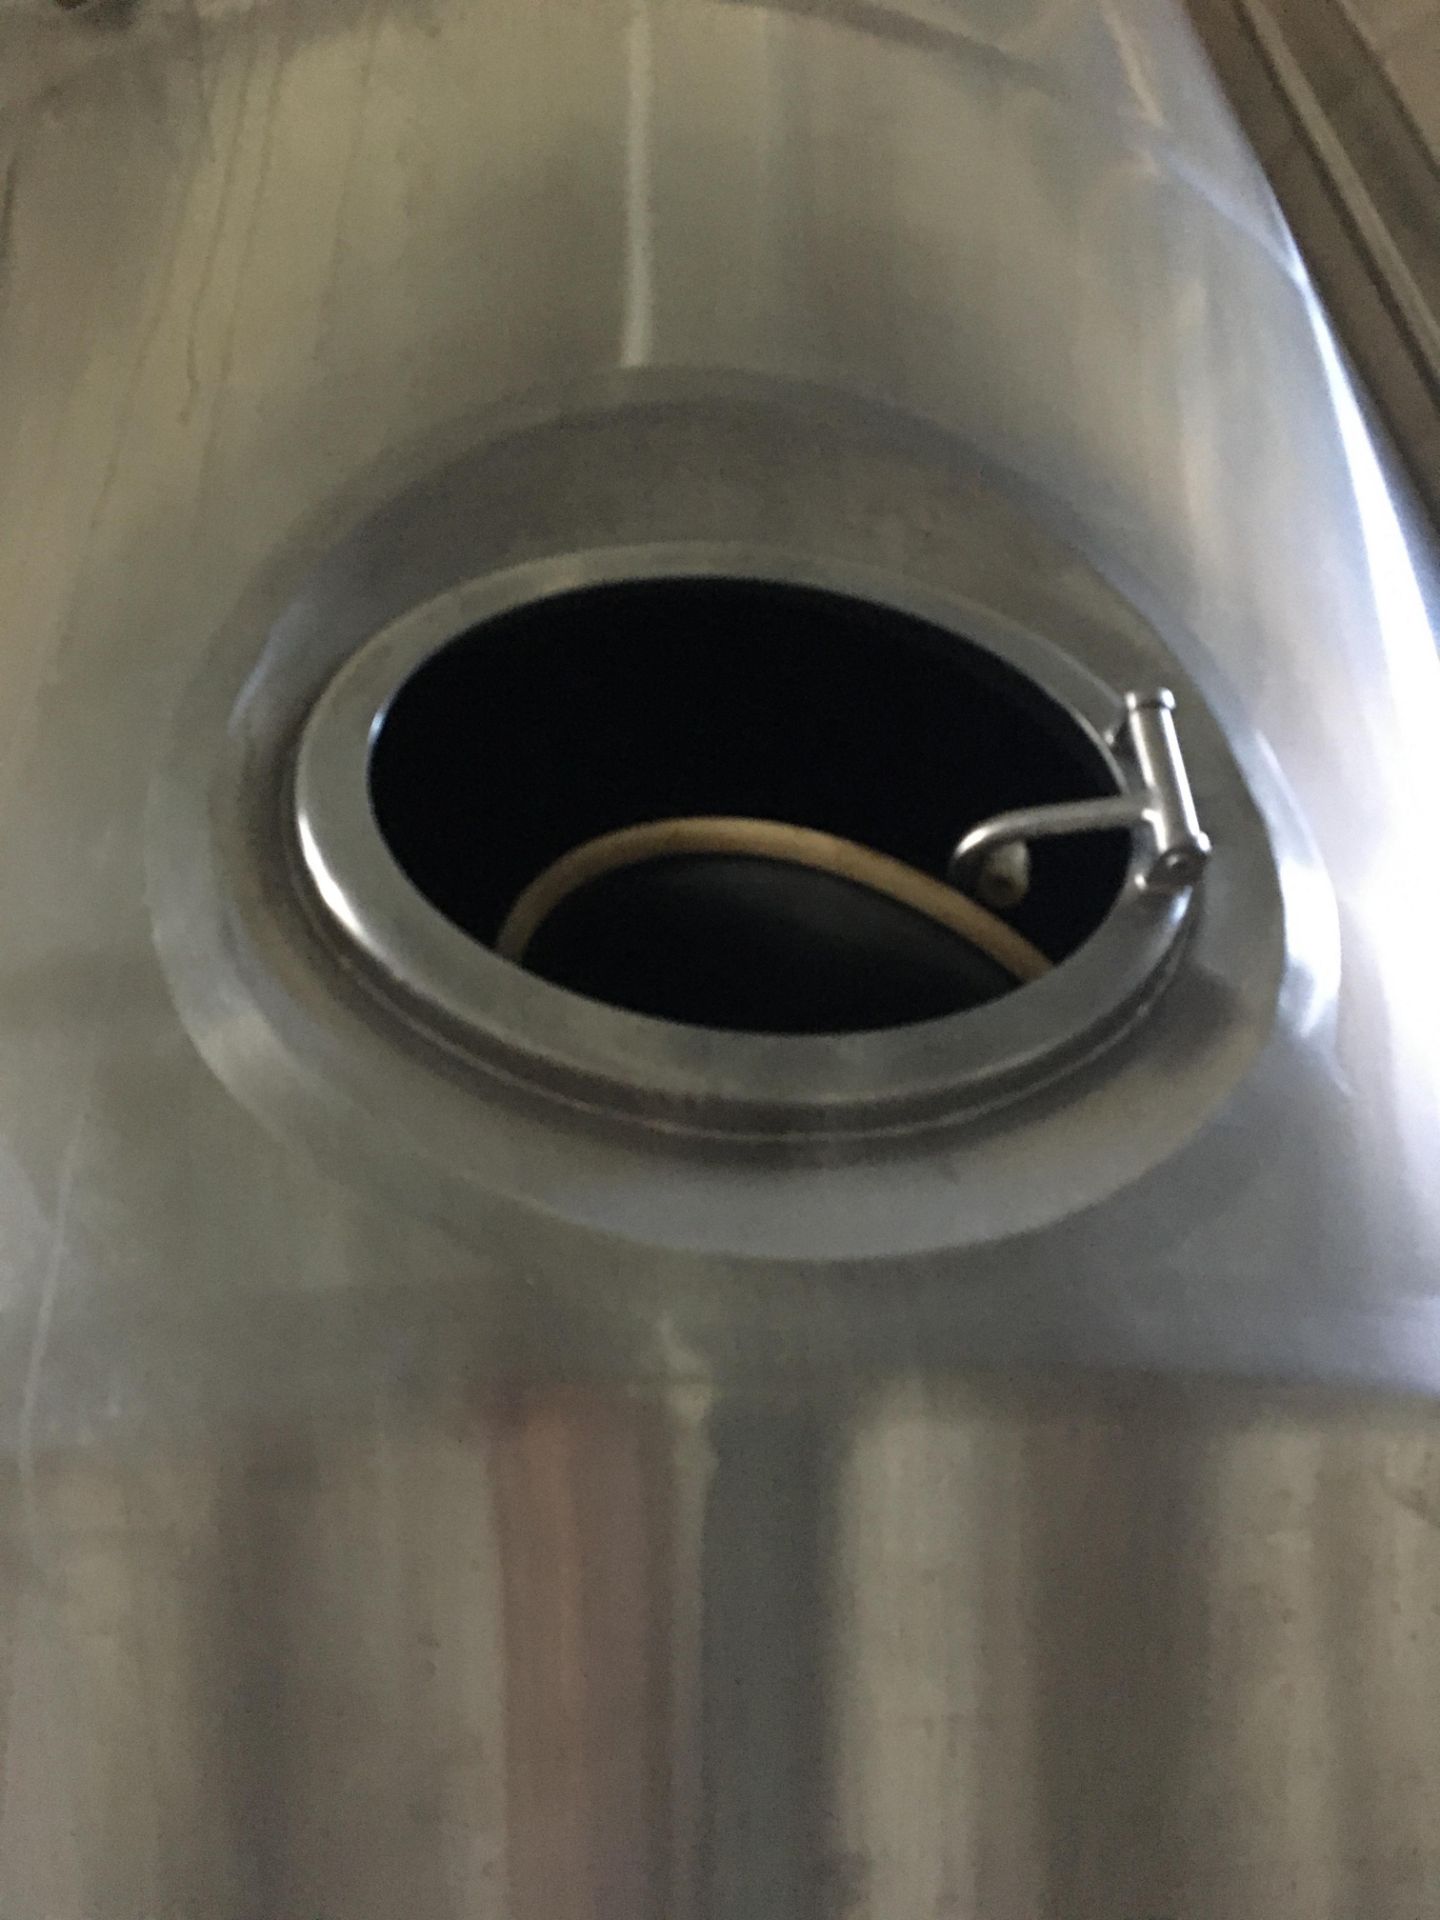 80-BBL Minnetonka Fermentation Tank, Model 80-BBL, Year 2017, Stainless Steel; Vessel store wort and - Image 11 of 17